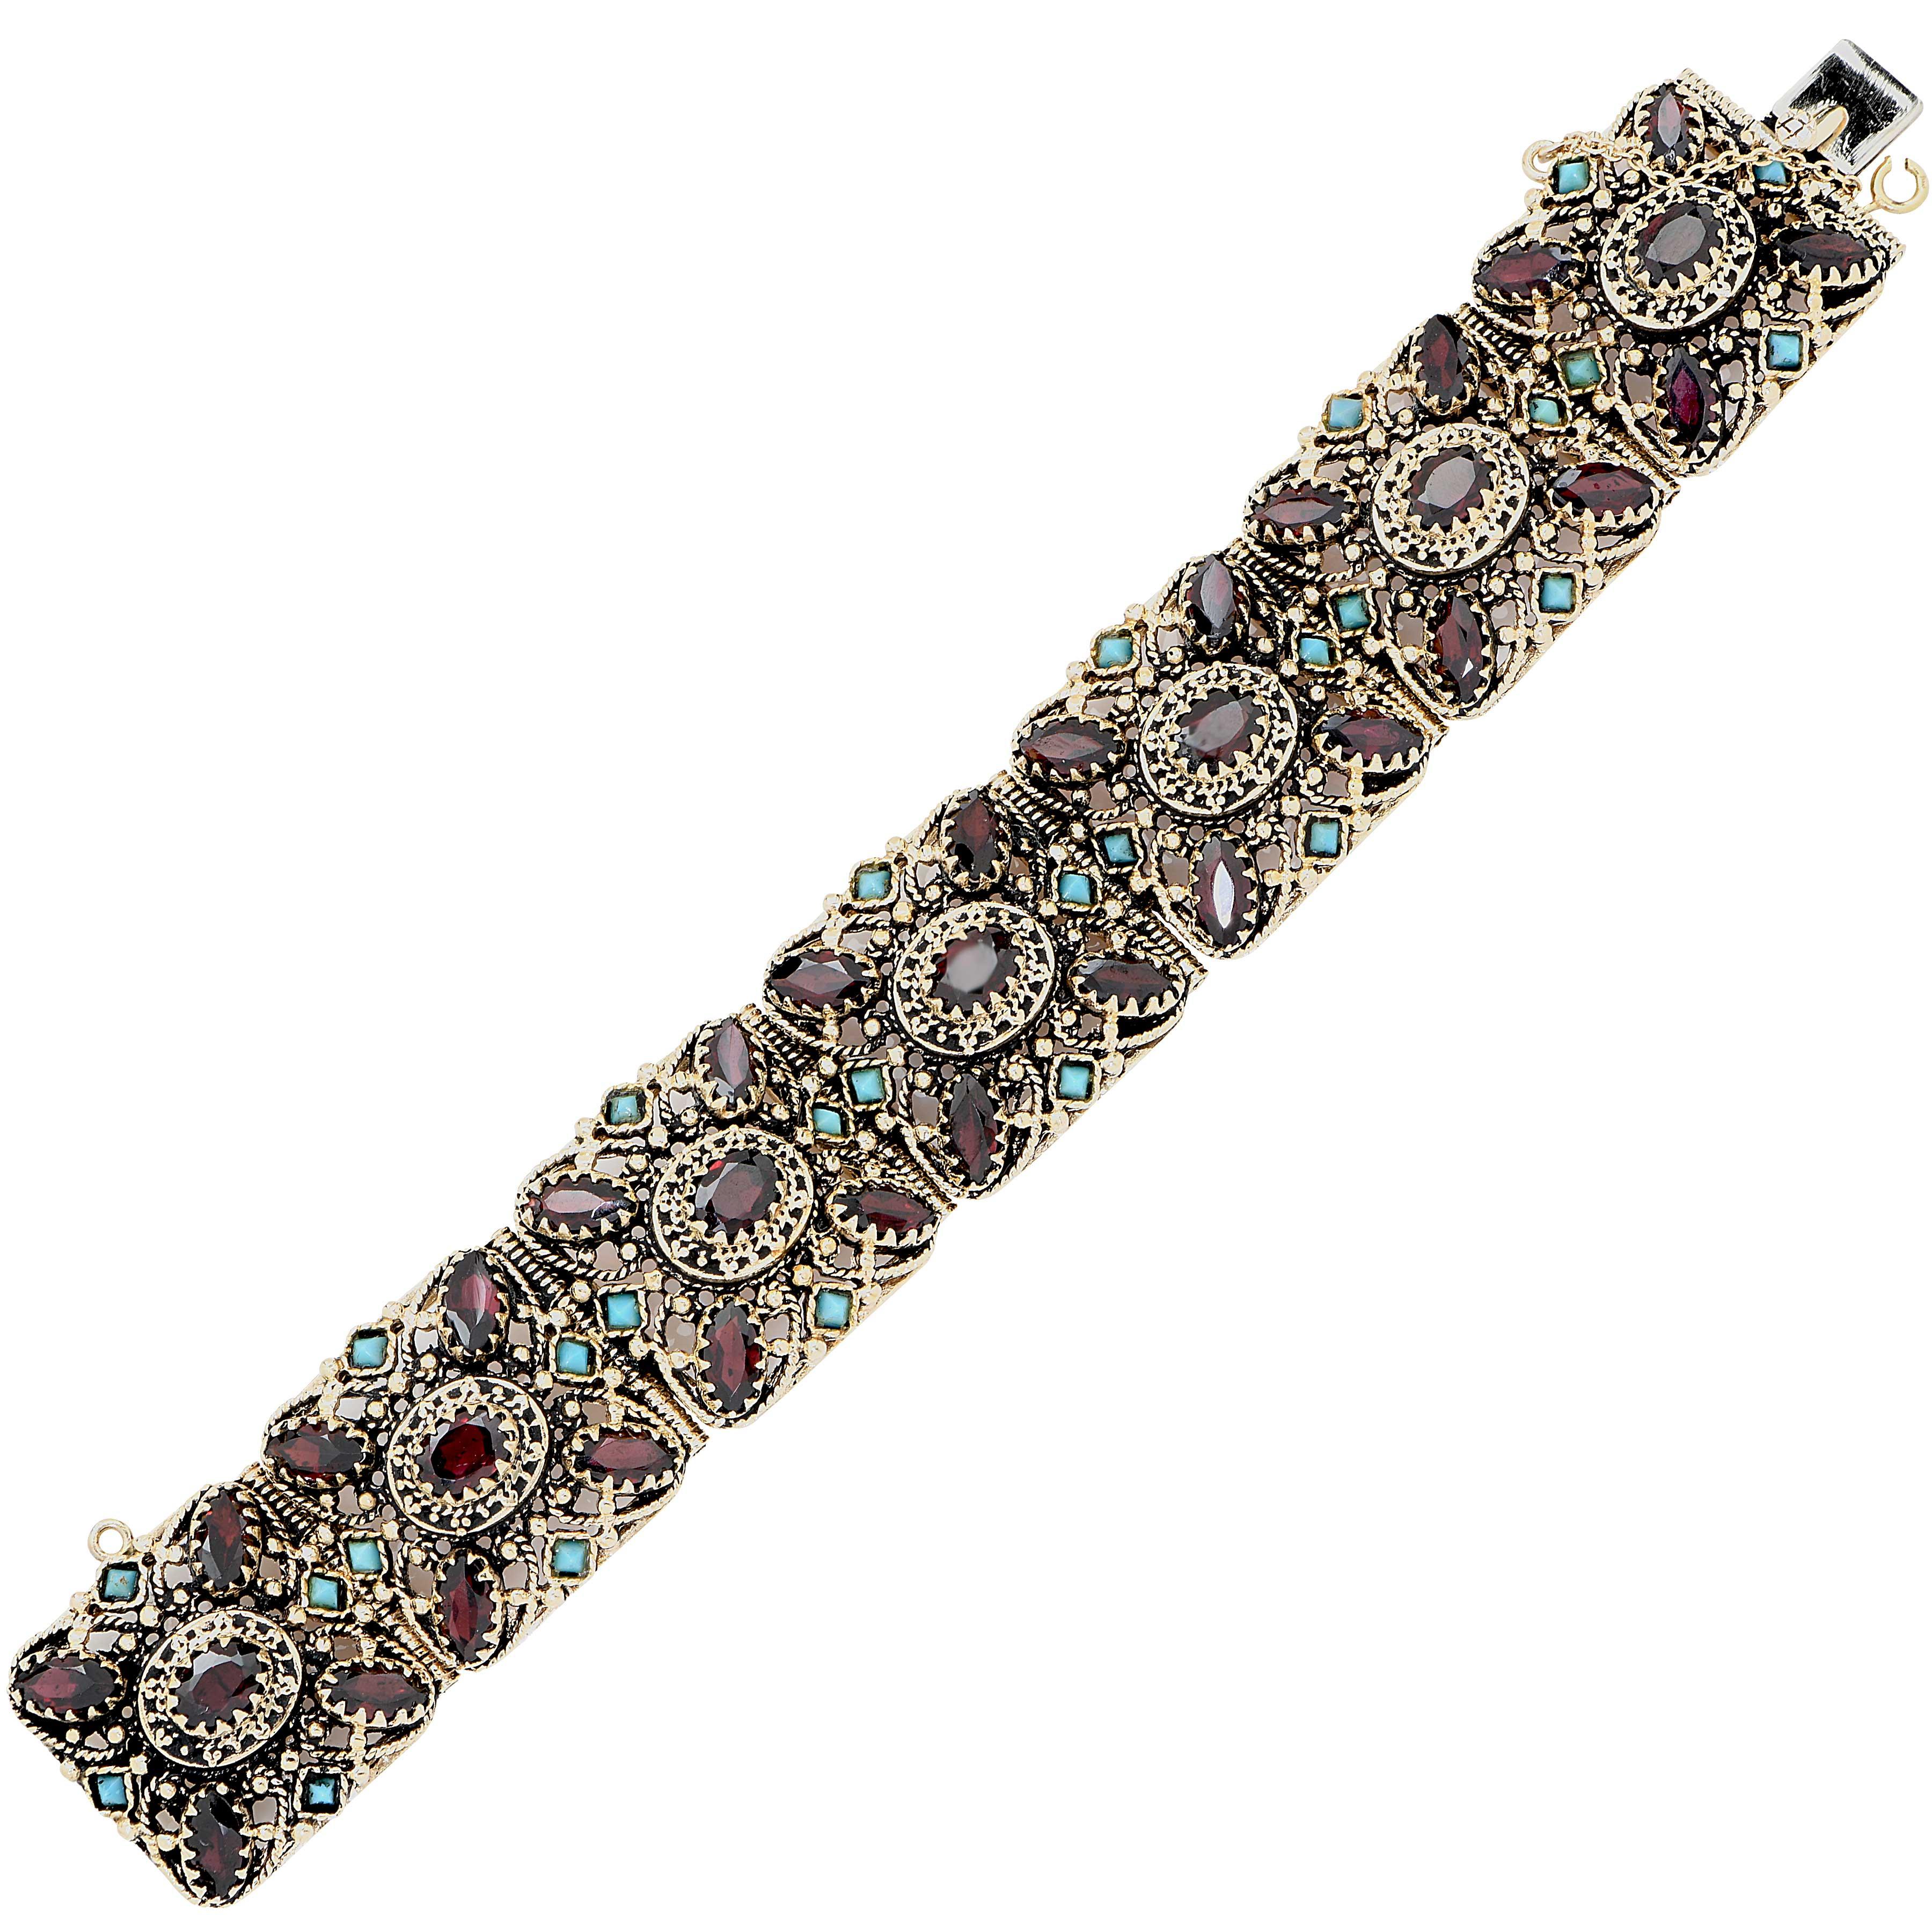 This Eclectic design features 35 oval cut garnets and 28 cabochon cut turquoise set in 14 Karat Yellow Gold. Circa 1970's
Bracelet Length: 6.75 Inches
Bracelet Metal Weight: 75.5 Grams
Metal Type: 14 Karat Yellow Gold